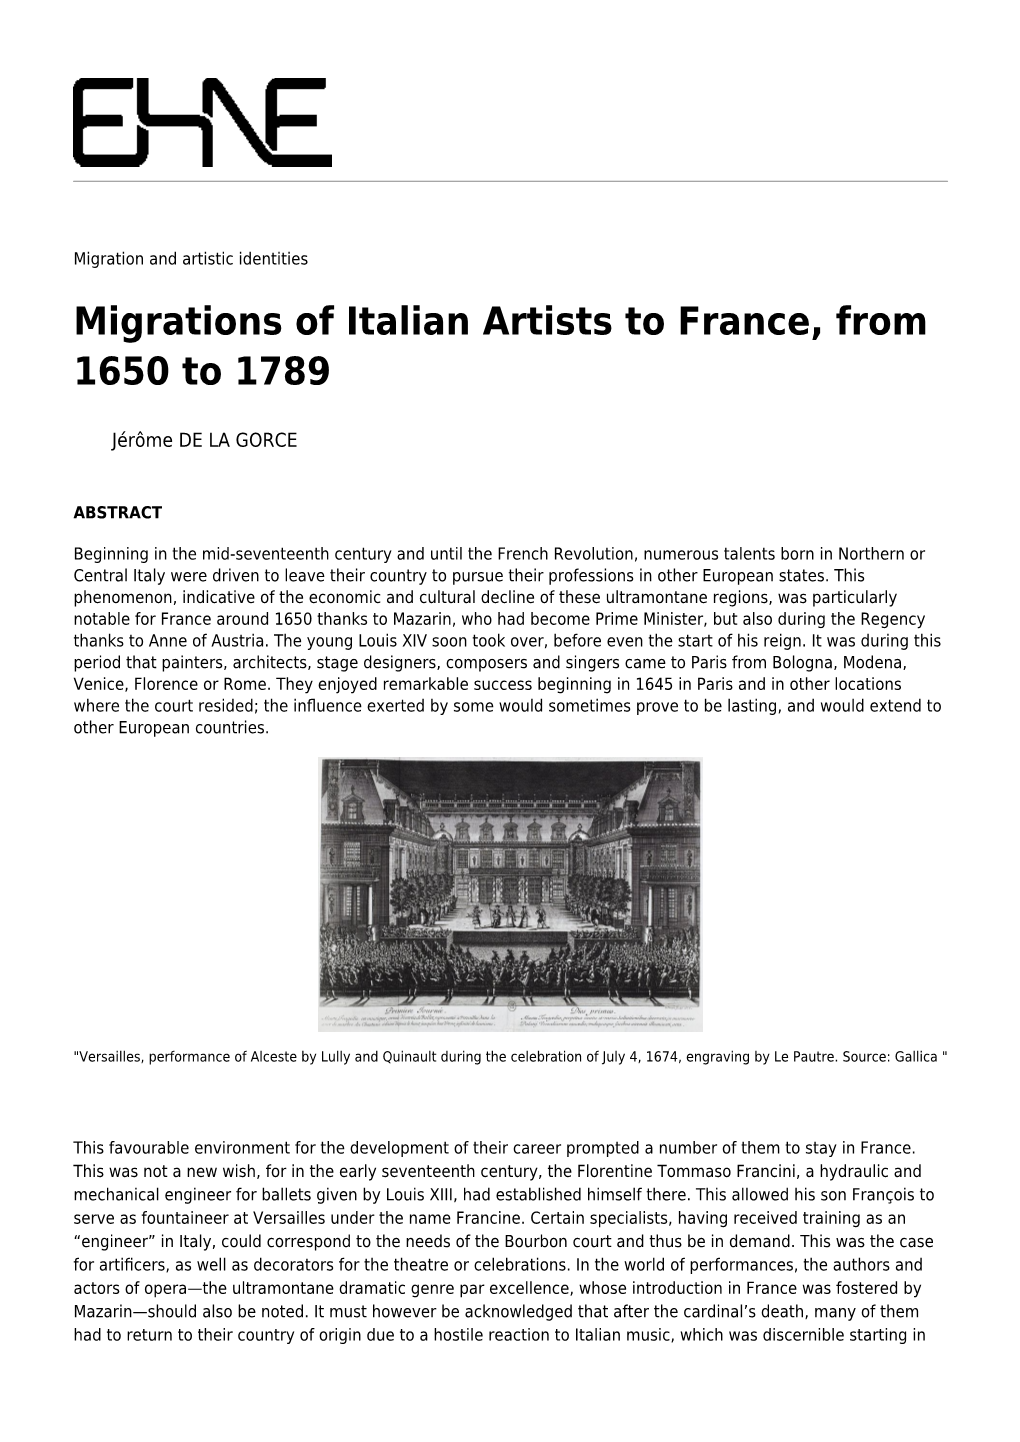 Migrations of Italian Artists to France, from 1650 to 1789